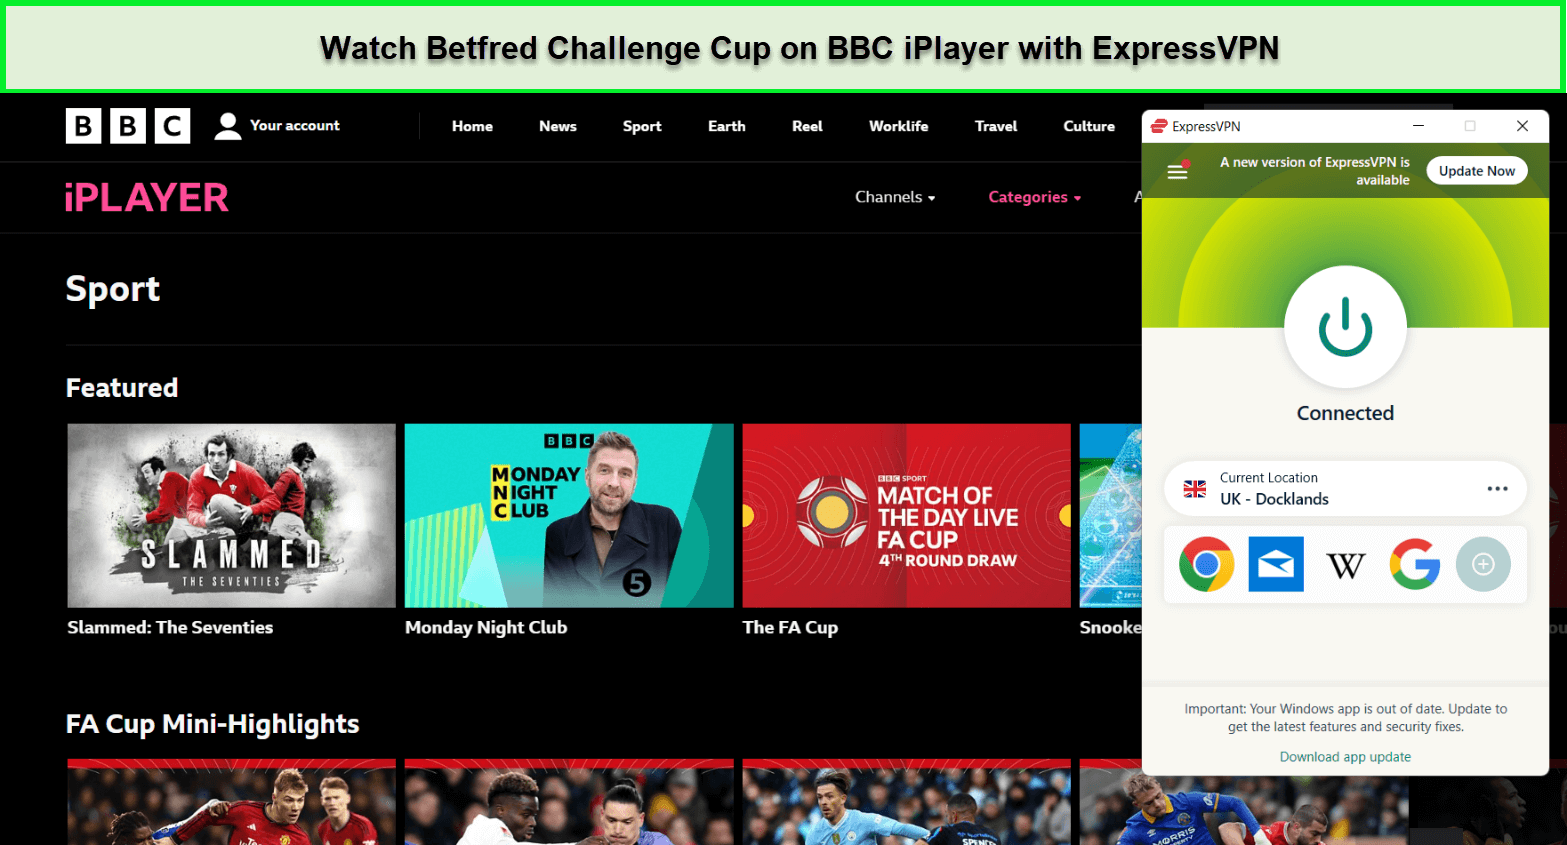 Watch-Betfred-Challenge-Cup-in-Hong Kong-on-BBC-iPlayer-via-ExpressVPN